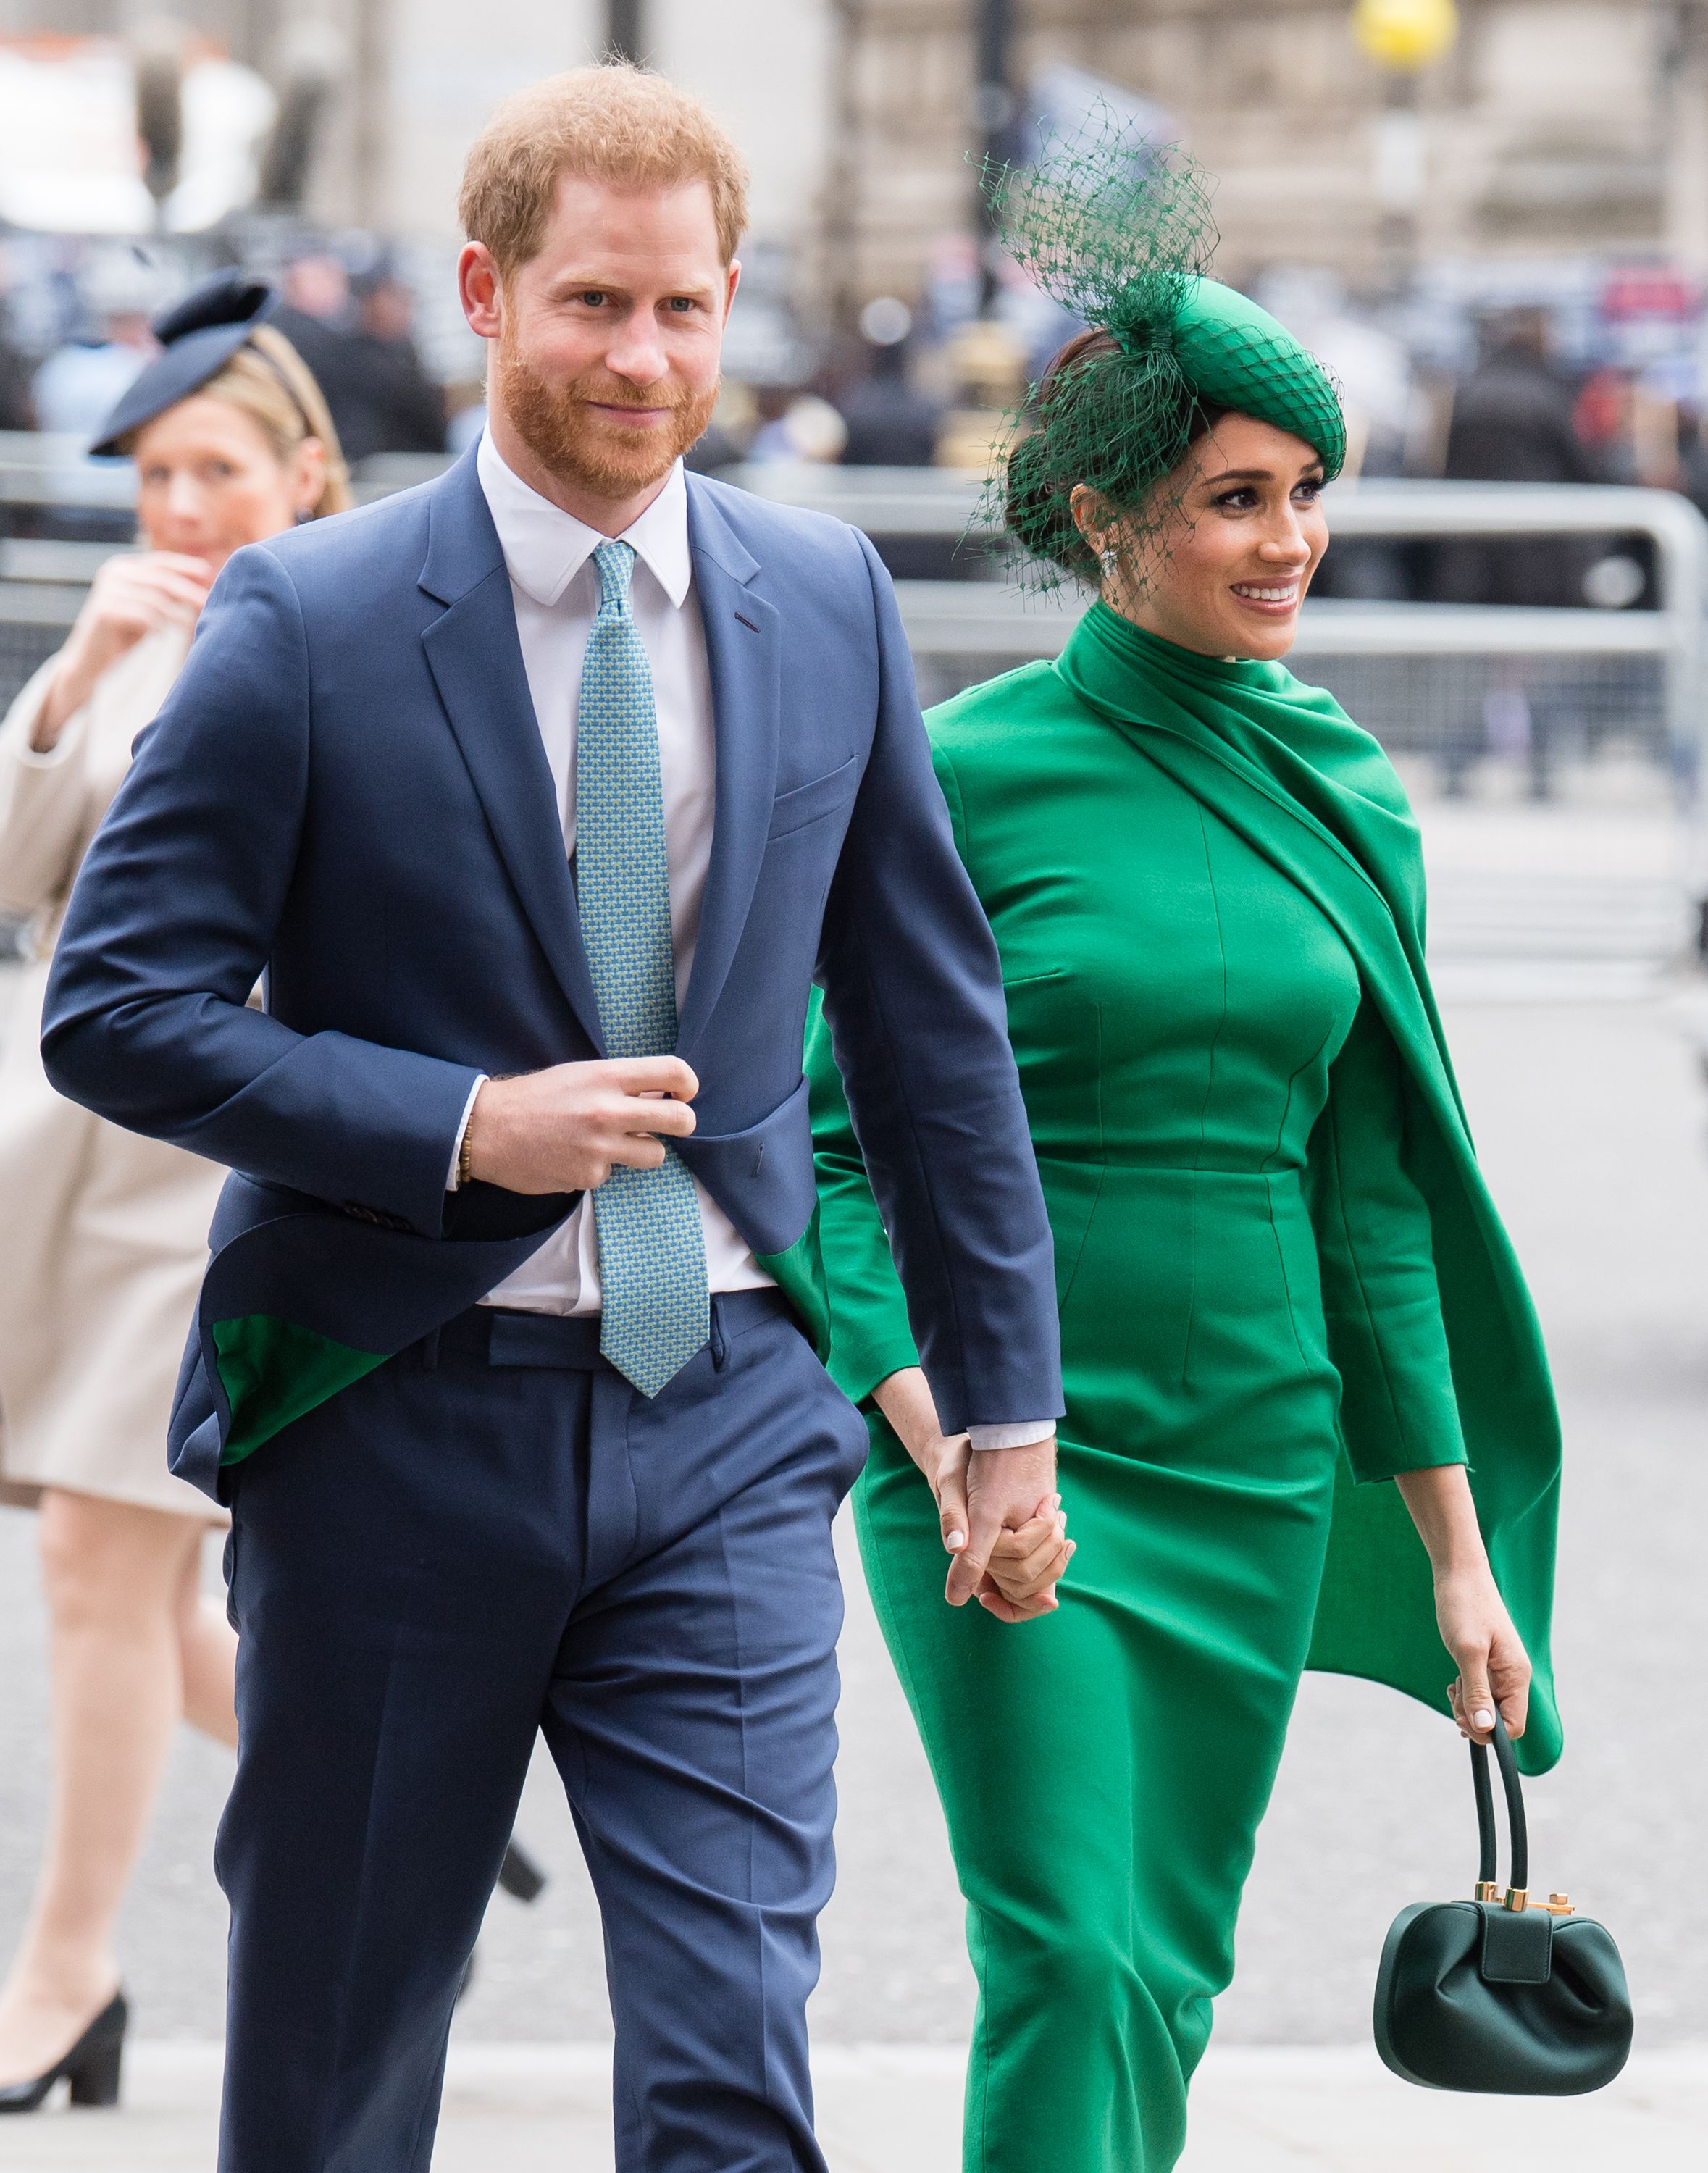 Prince Harry, Duke of Sussex and Meghan Markle, Duchess of Sussex attend the Commonwealth Day Service 2020 on March 09, 2020 | Getty Images